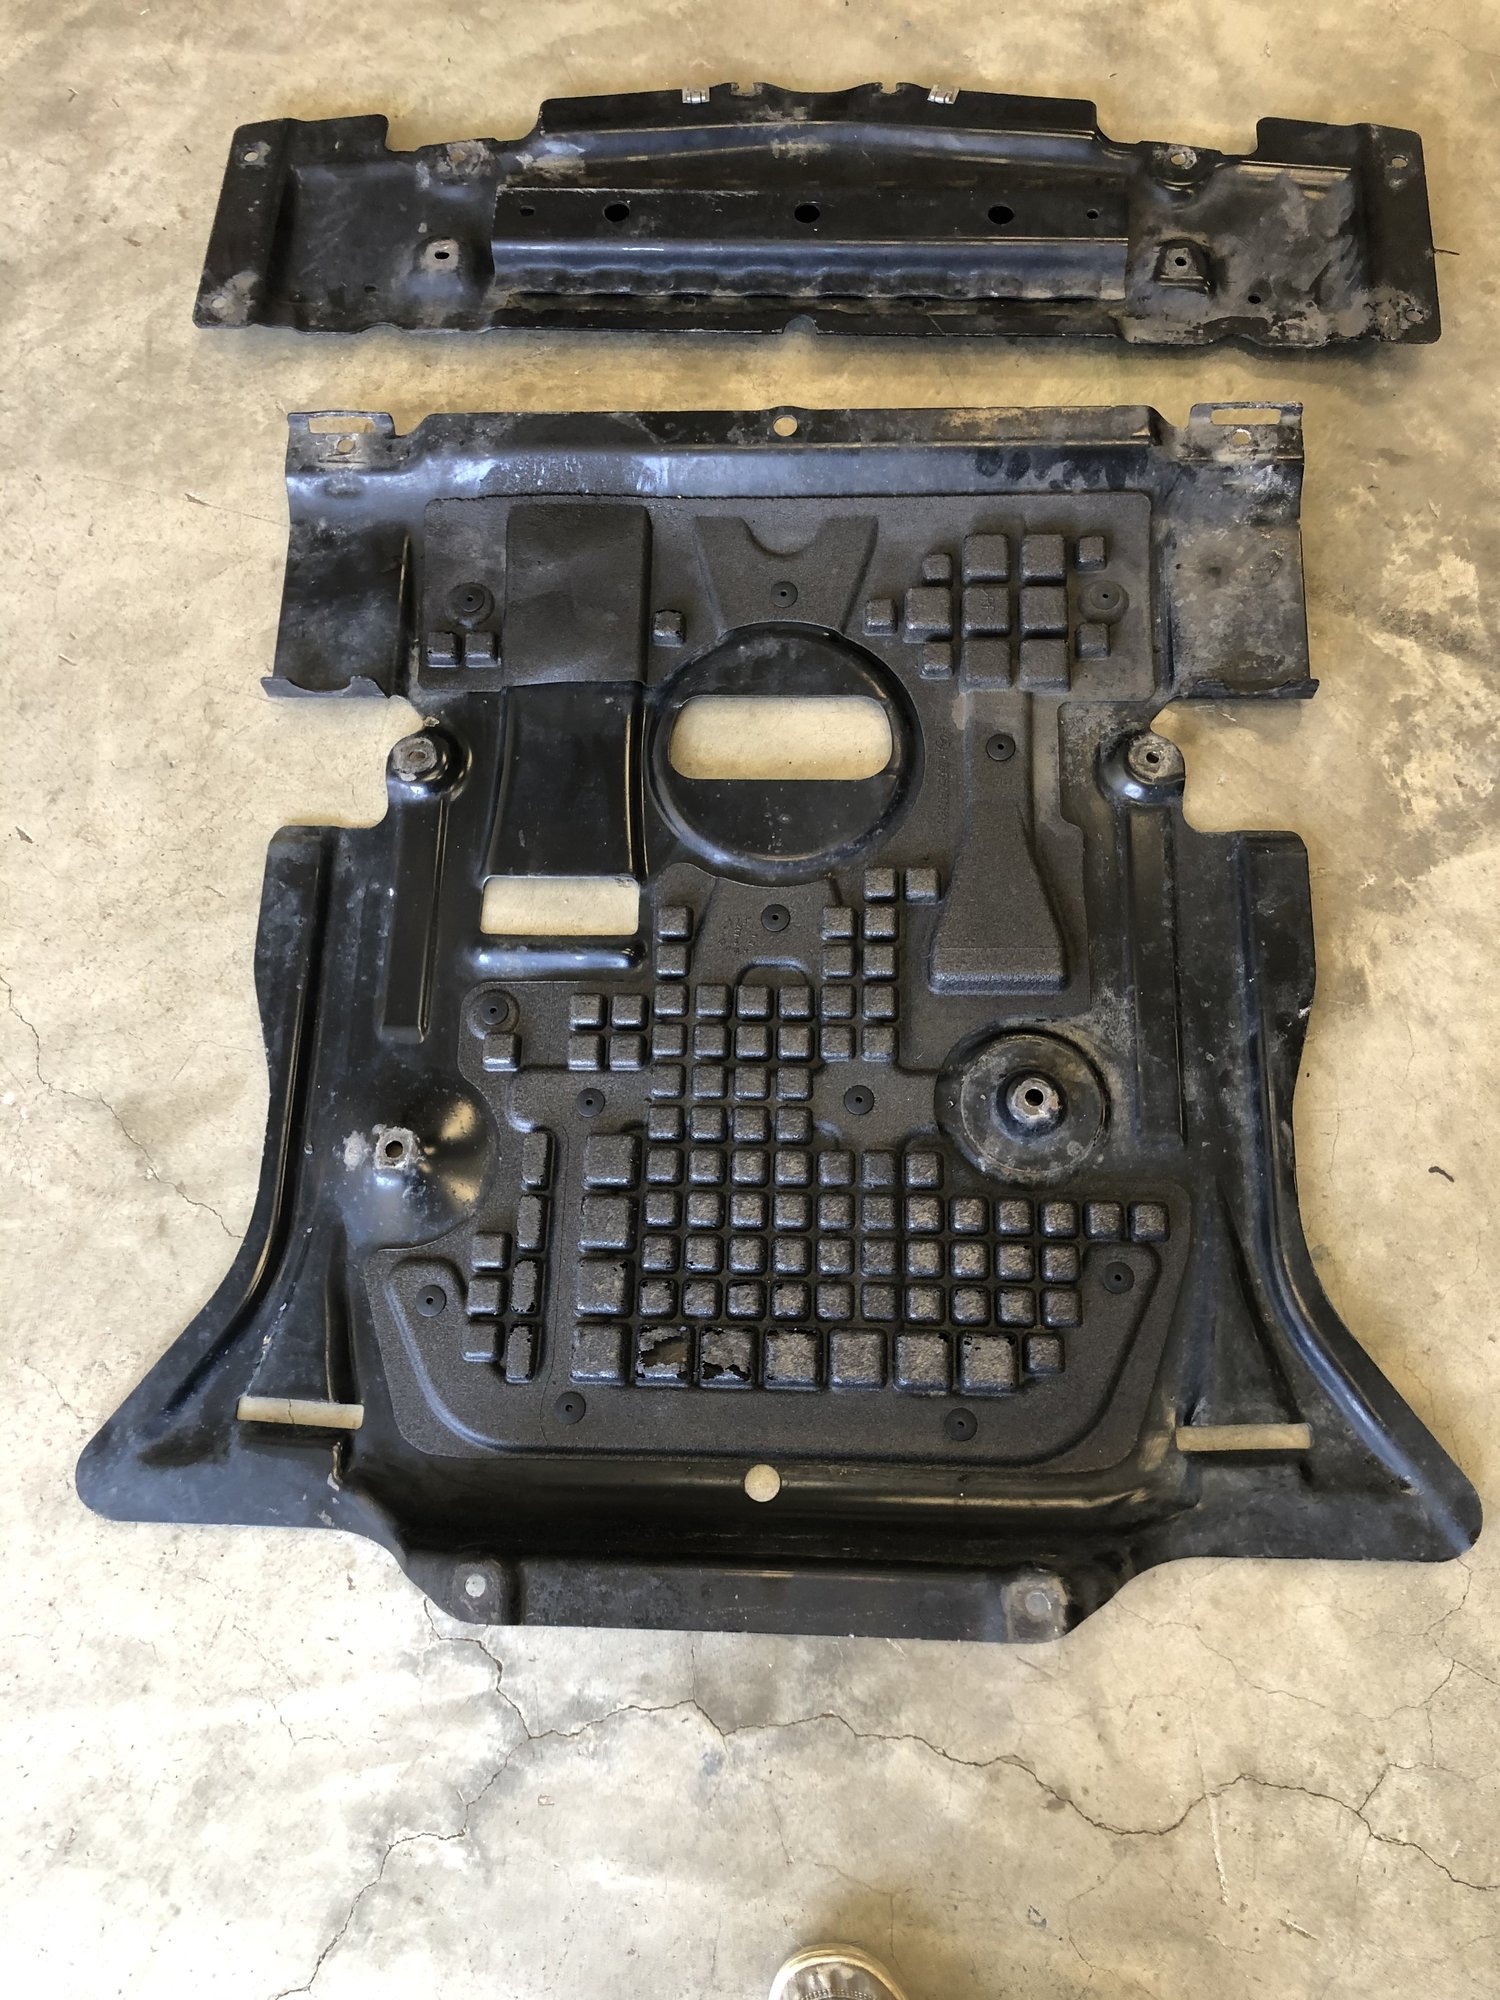 Accessories - Metal Skid Plates - Off Road Package OEM - W166 or X166 (ML/GLE or GL) - Used - 0  All Models - Peoria, IL 61615, United States